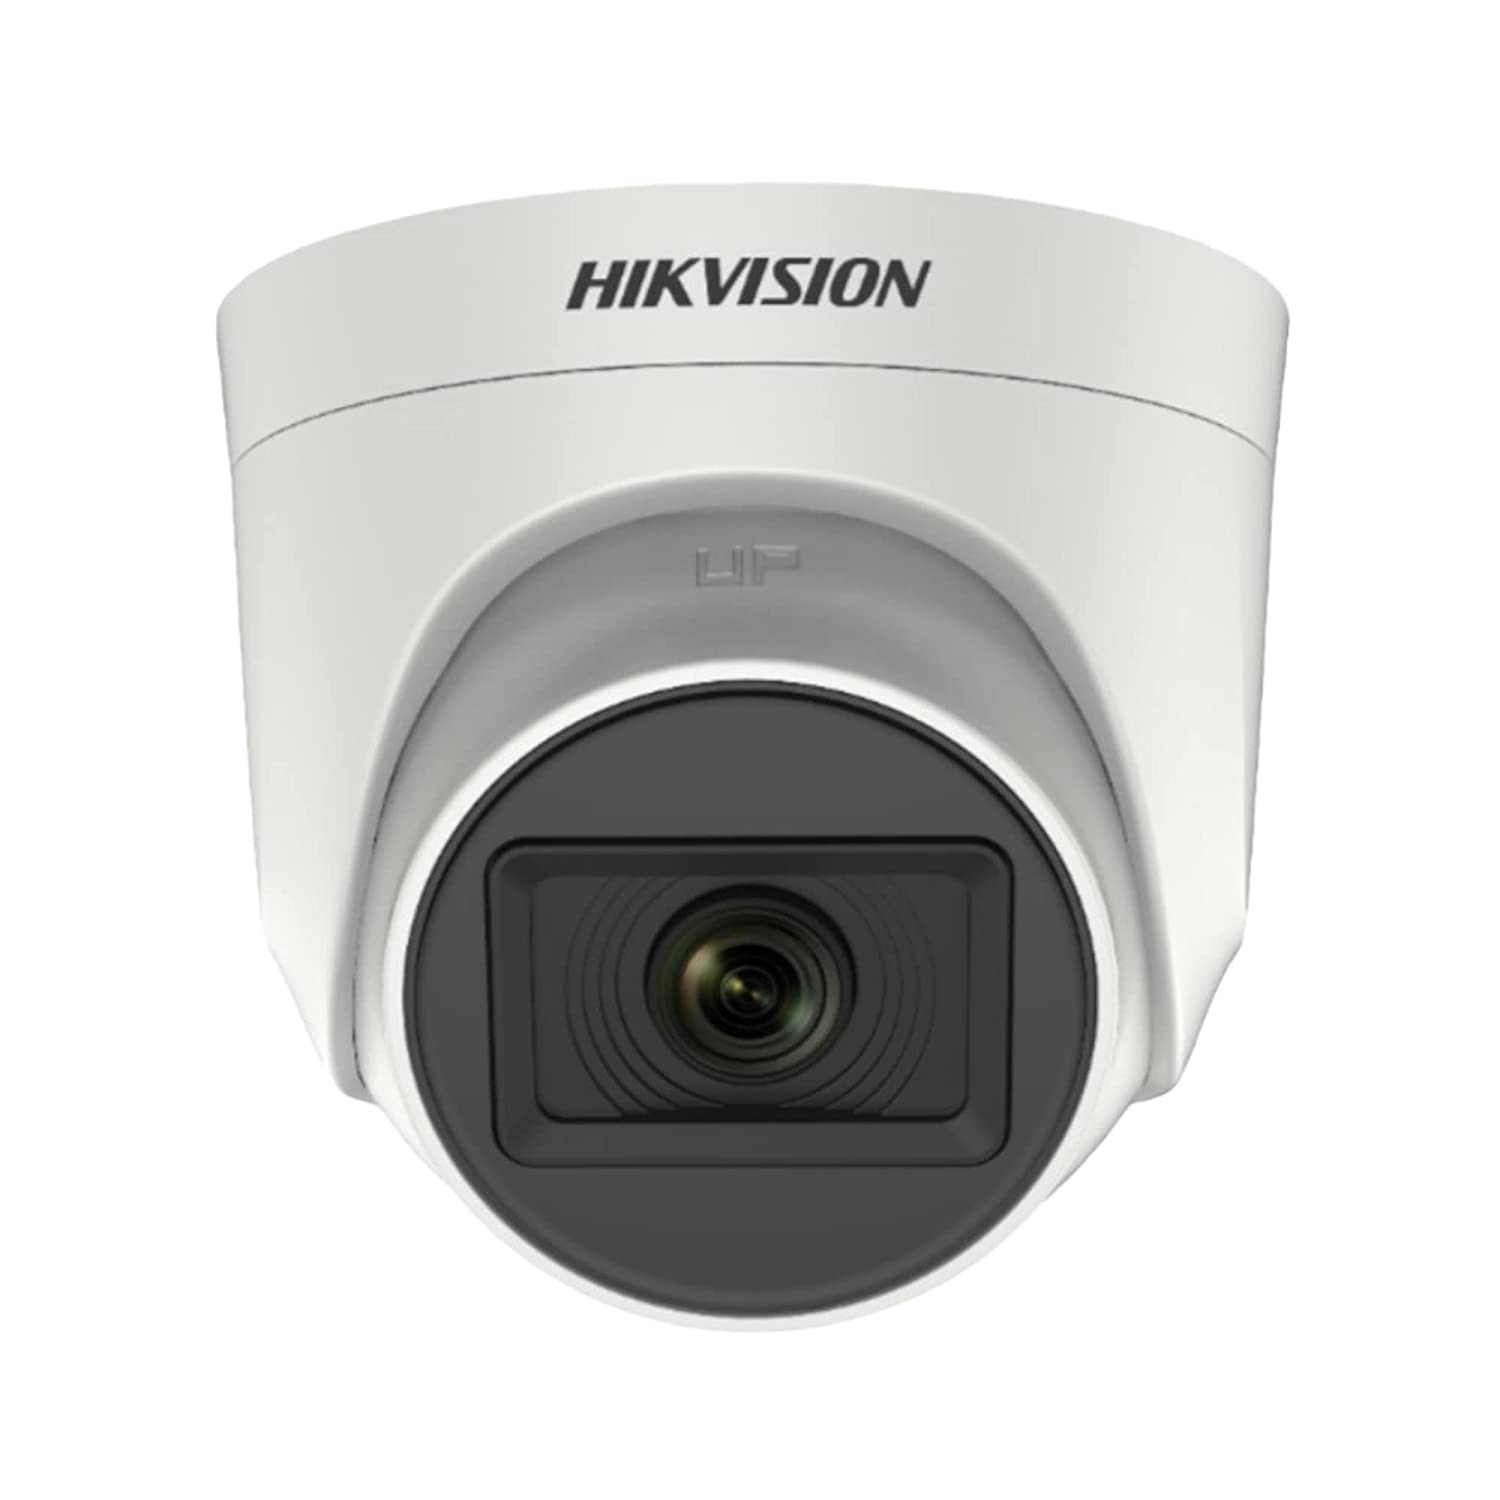 Hikvision 5 MP Indoor Dome